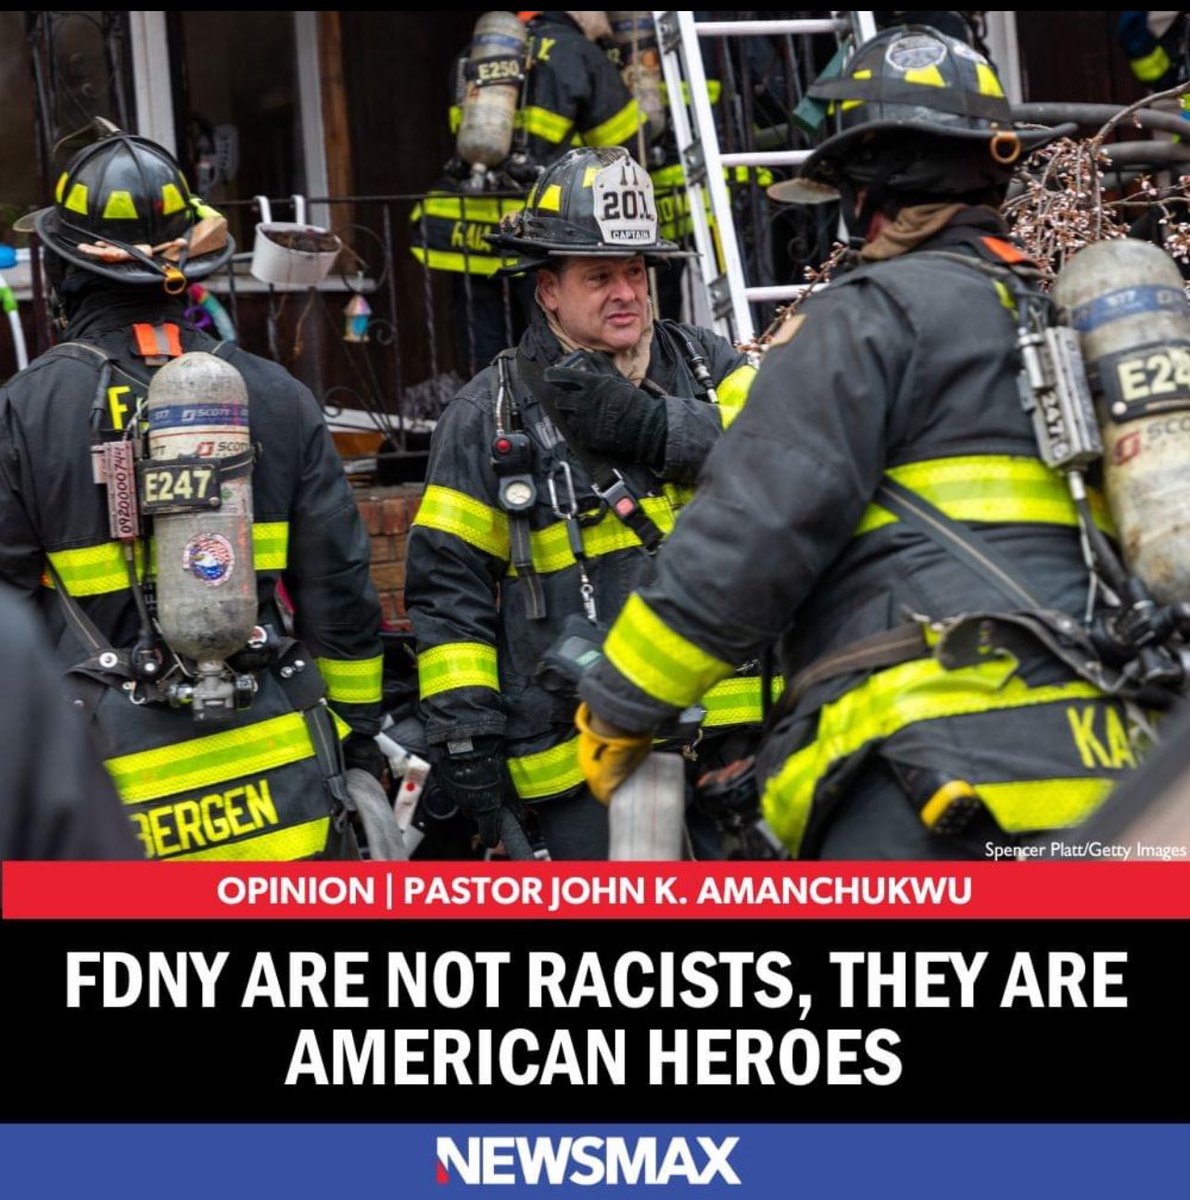 The FDNY, next to the NYPD, is comprised of the most self-sacrificing Americans in our nation. These brave individuals are God-fearing patriots' says, Pastor John K. Amanchukwu Sr.